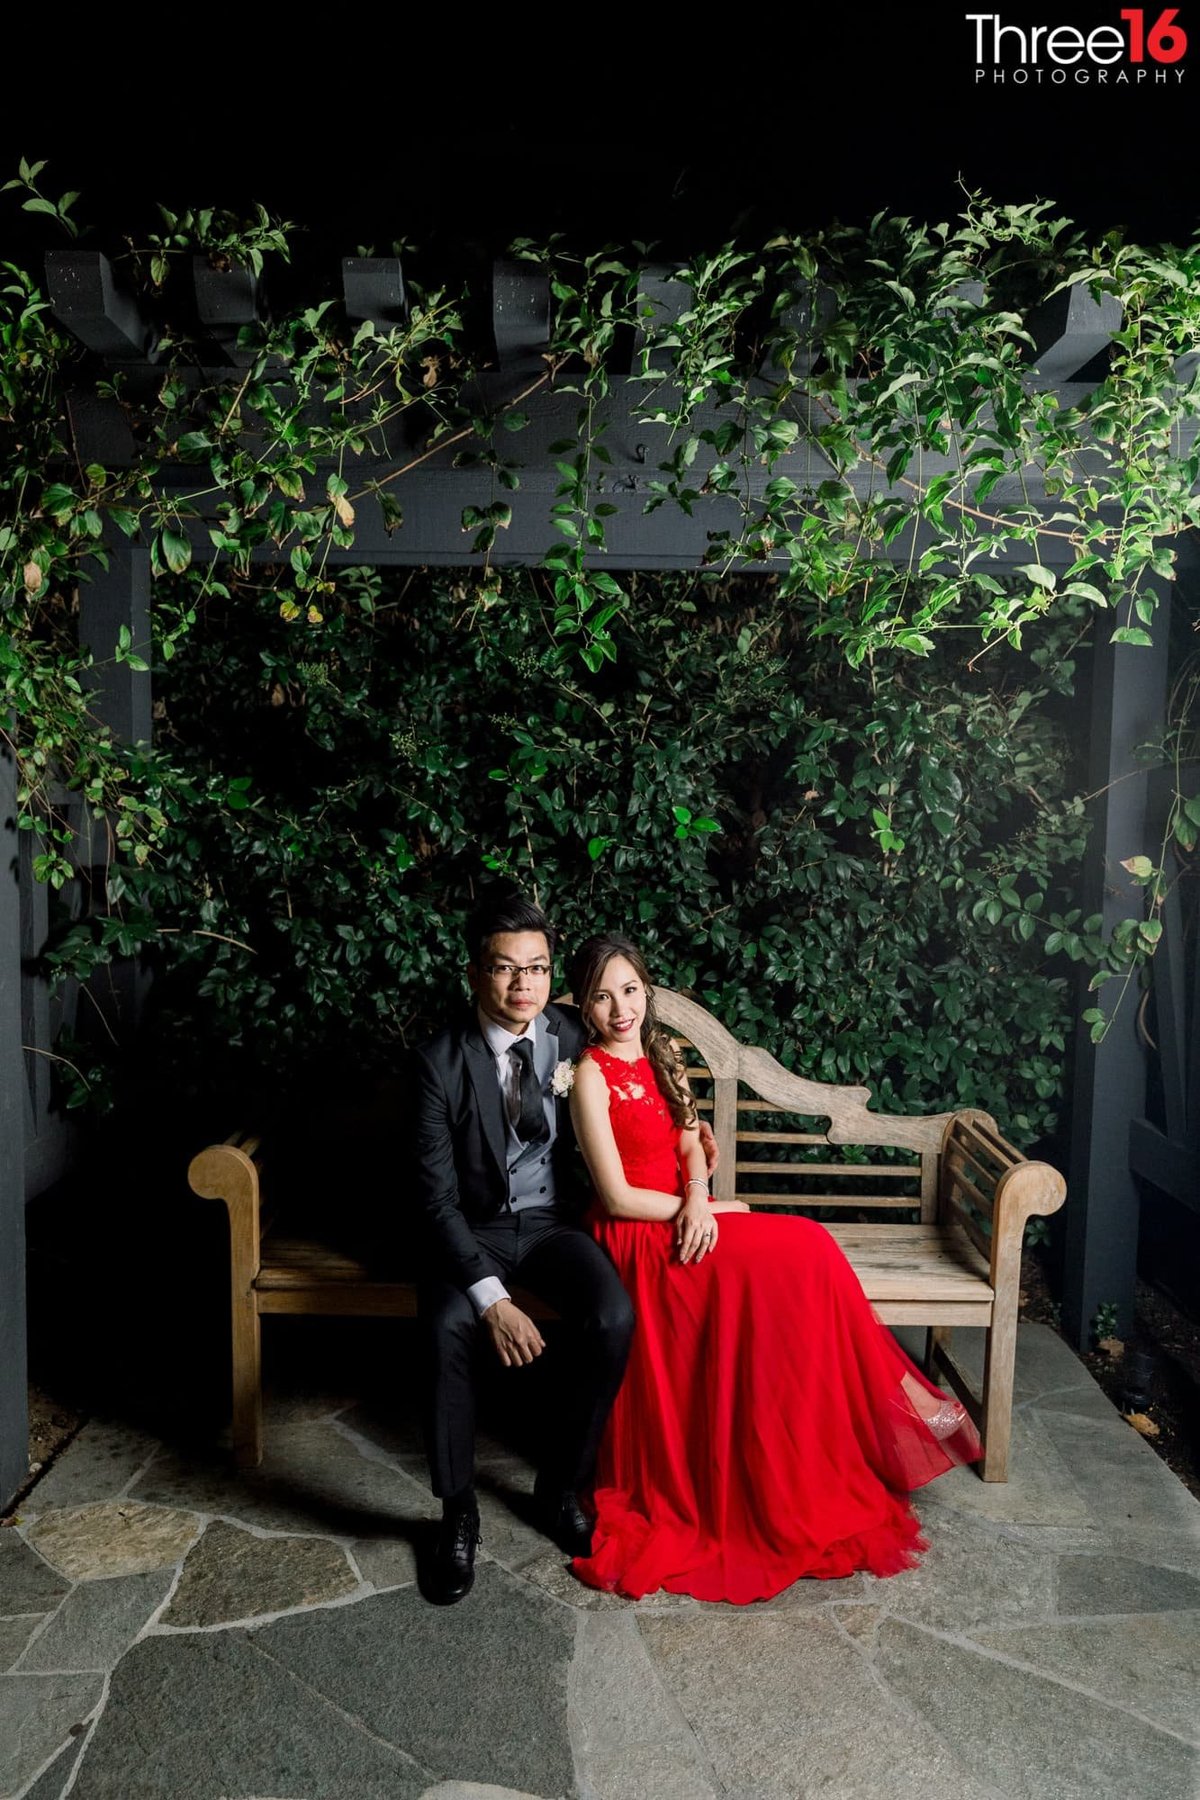 Bride and Groom sit together on a outdoor bench